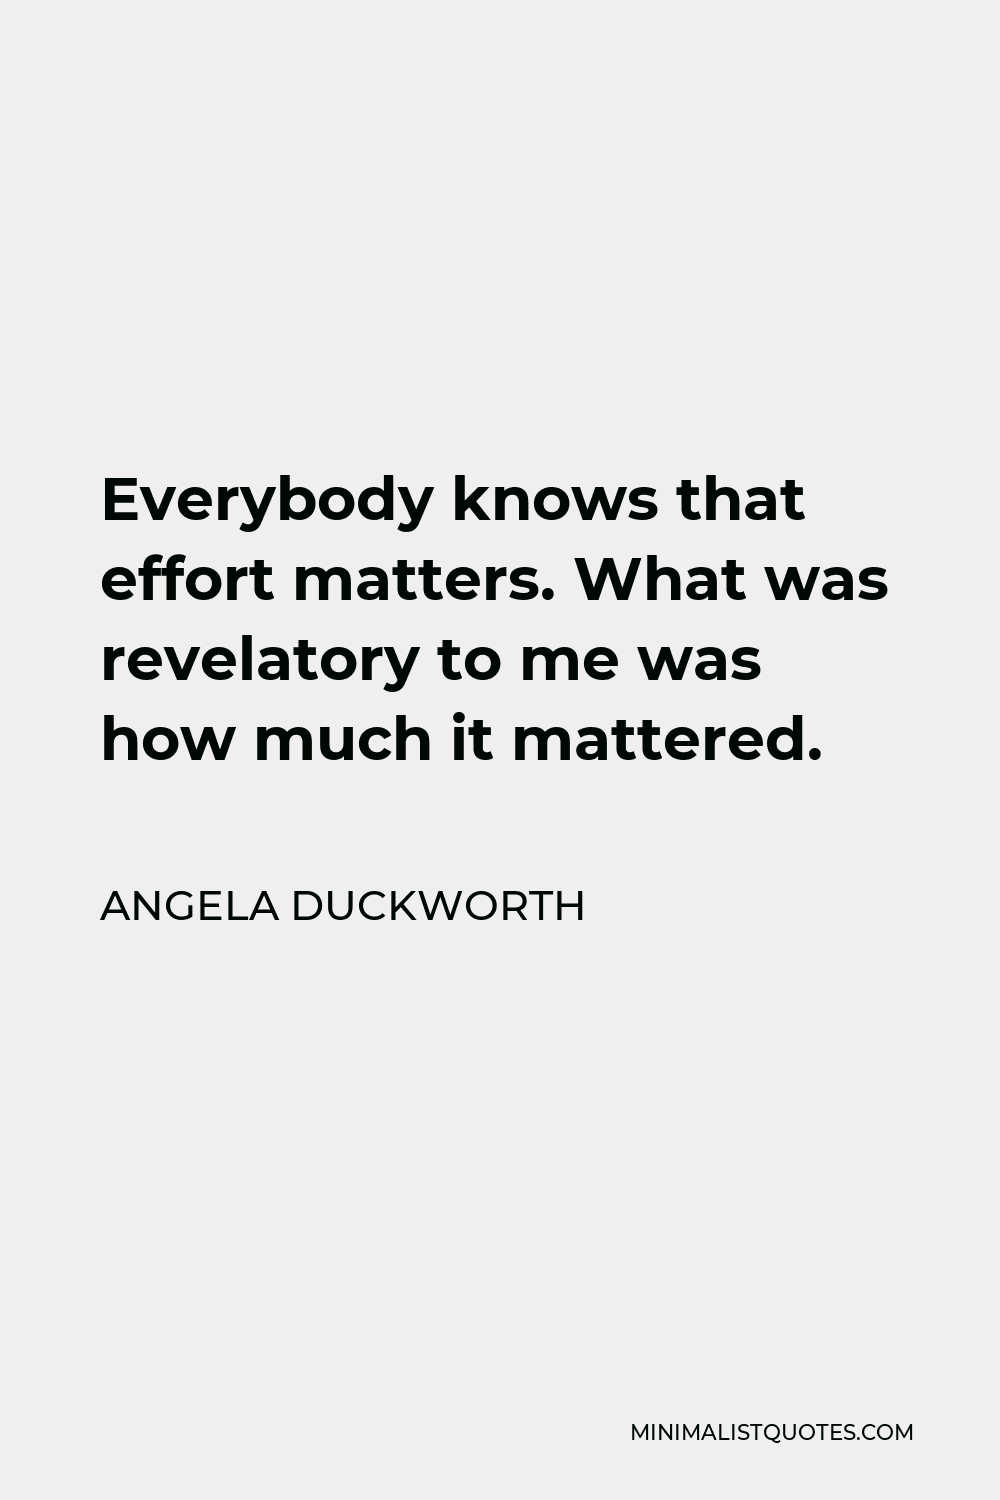 Angela Duckworth Quote - Everybody knows that effort matters. What was revelatory to me was how much it mattered.